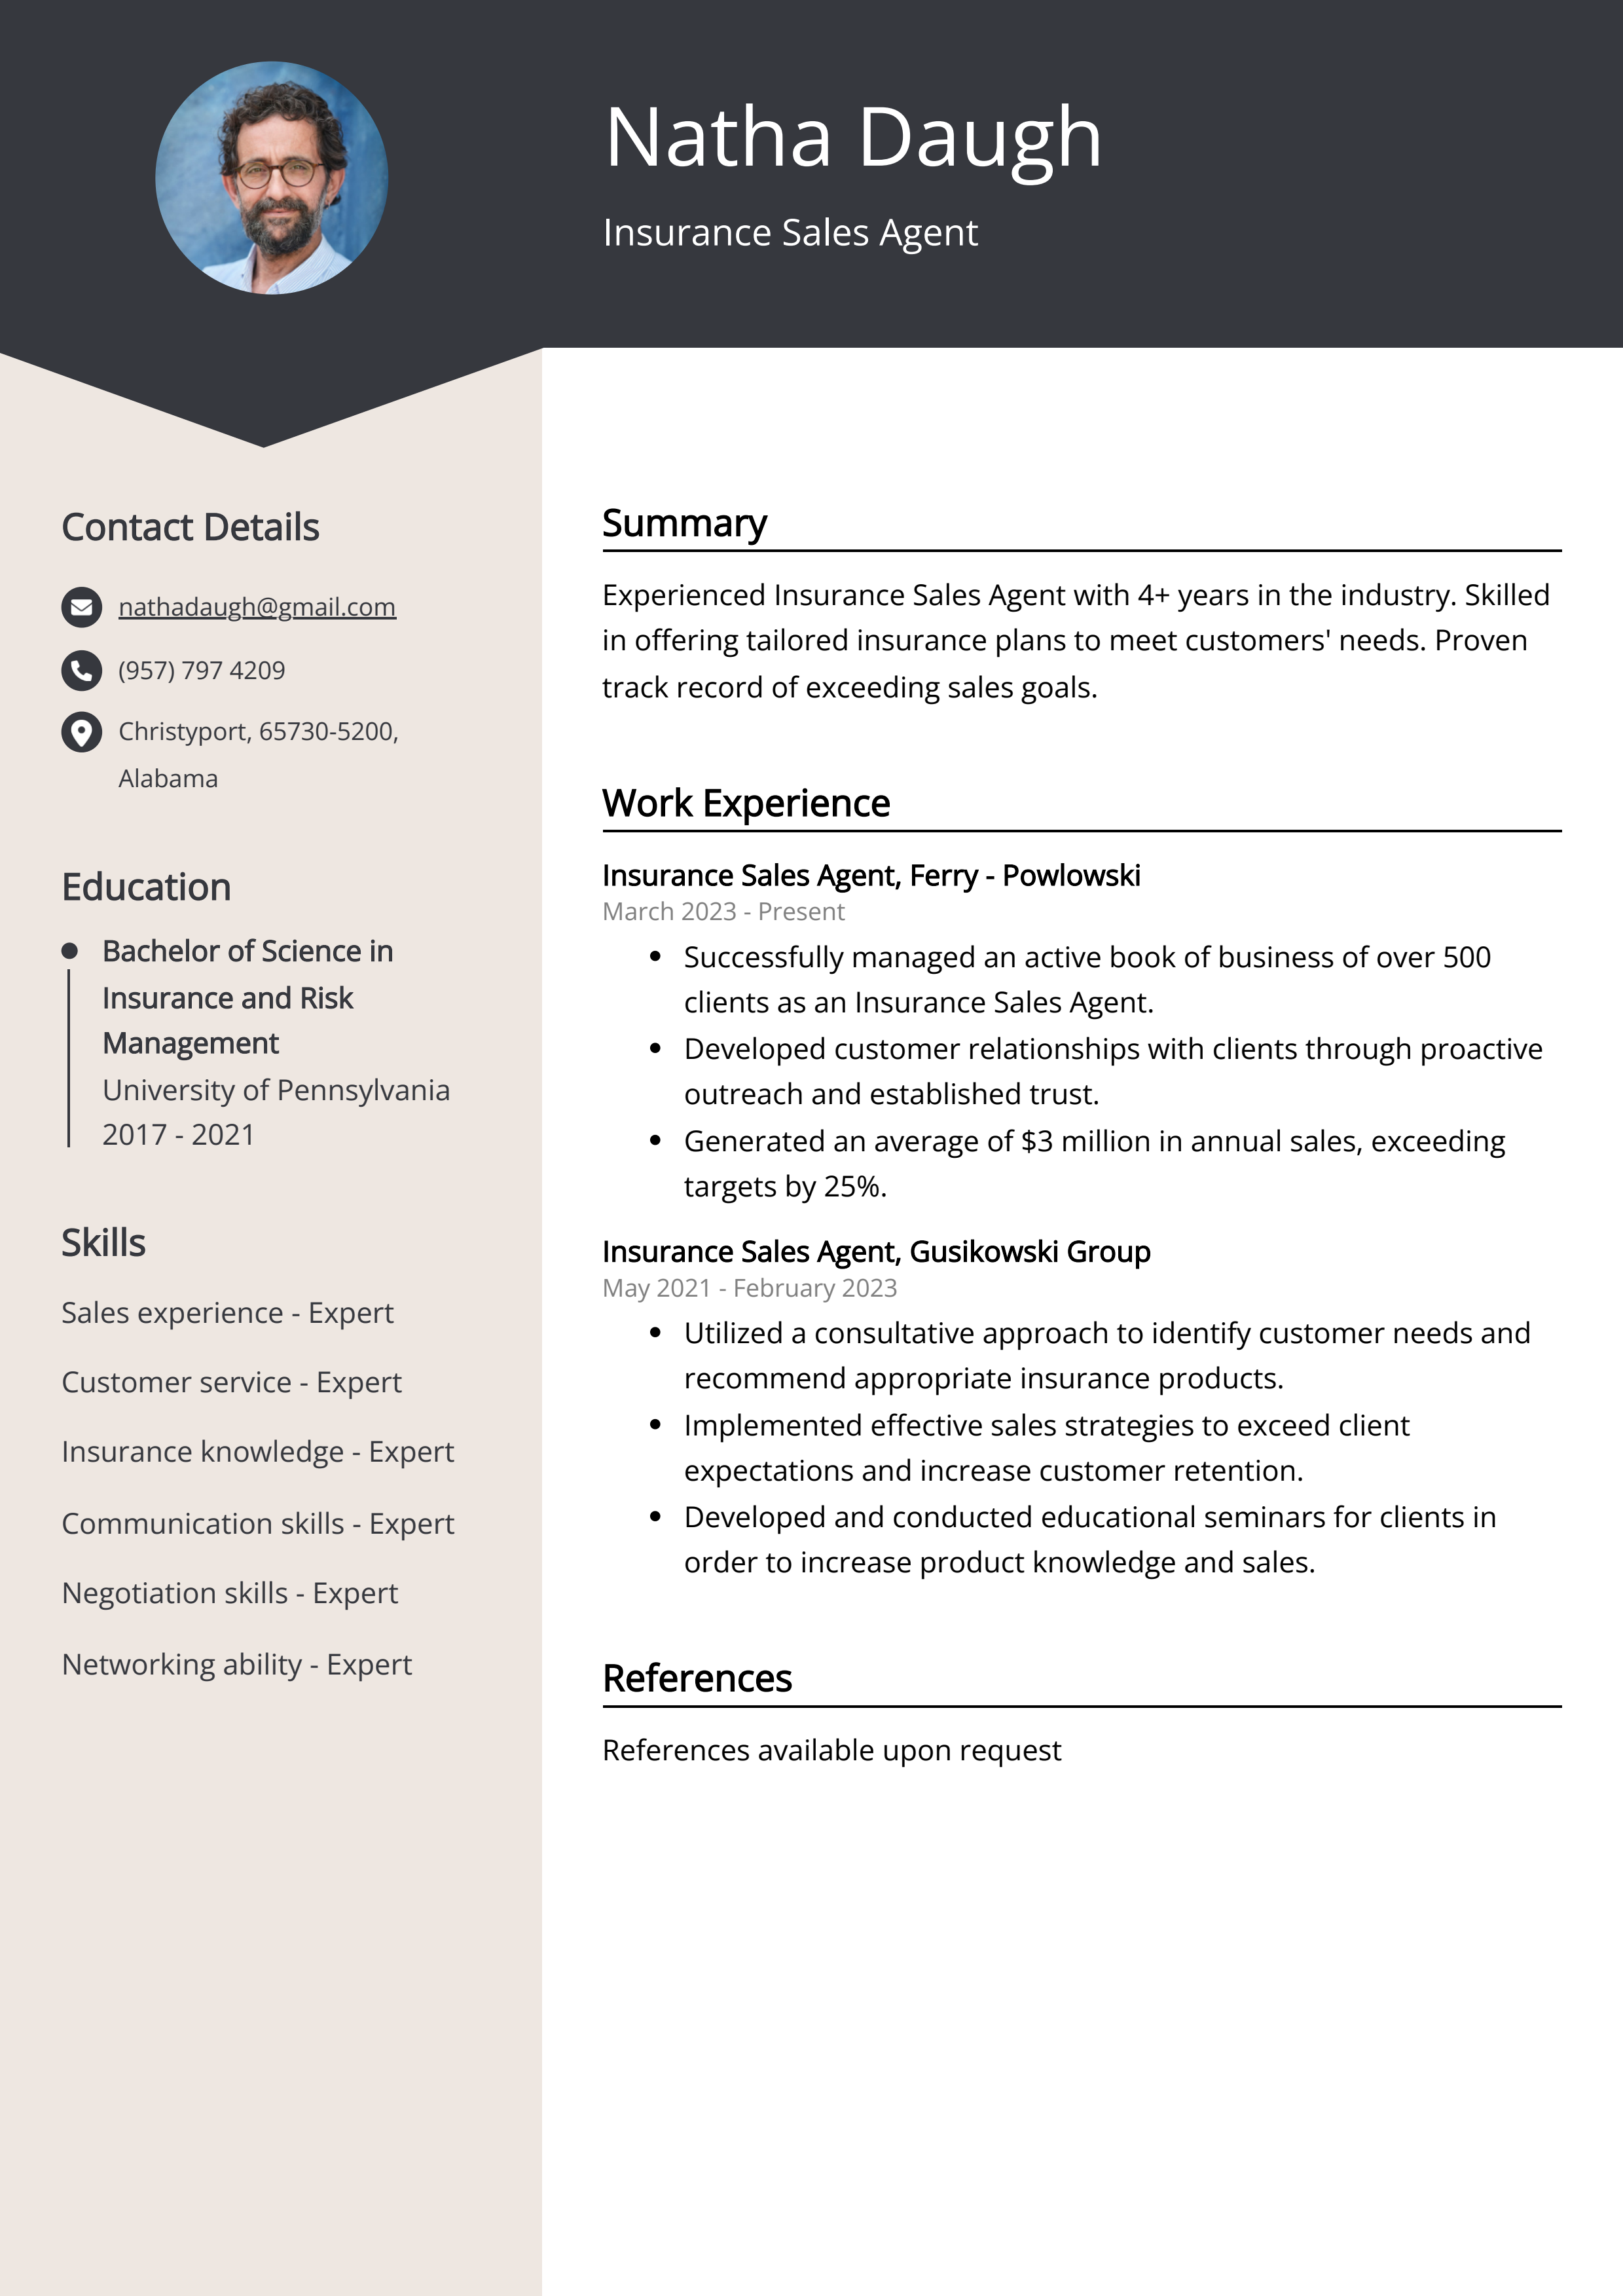 Experienced Insurance Sales Agent Resume Example